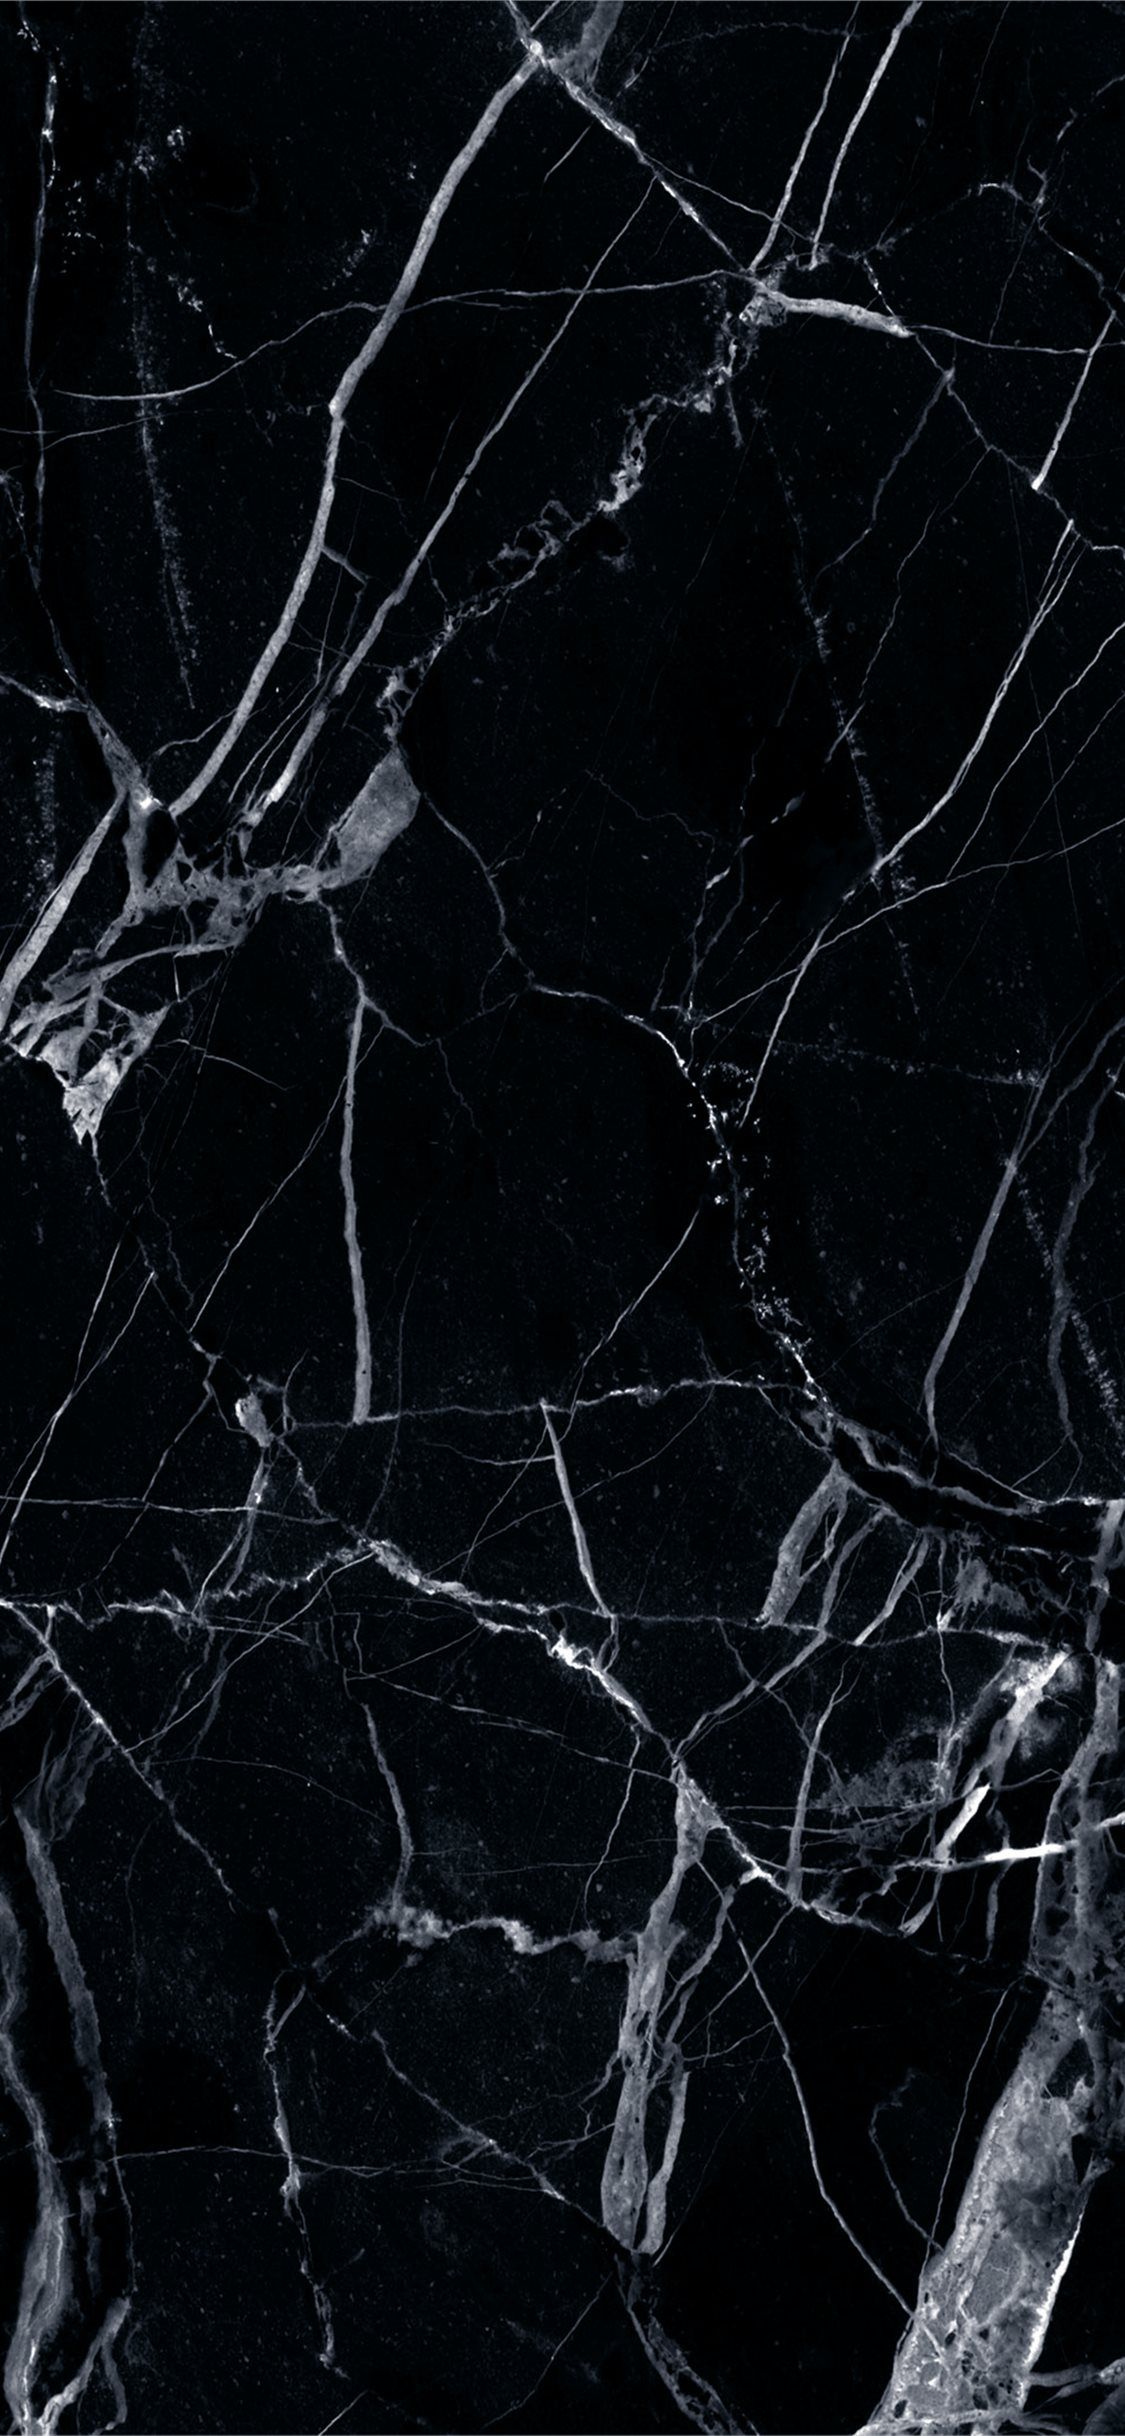 cracked iphone wallpaper realistic